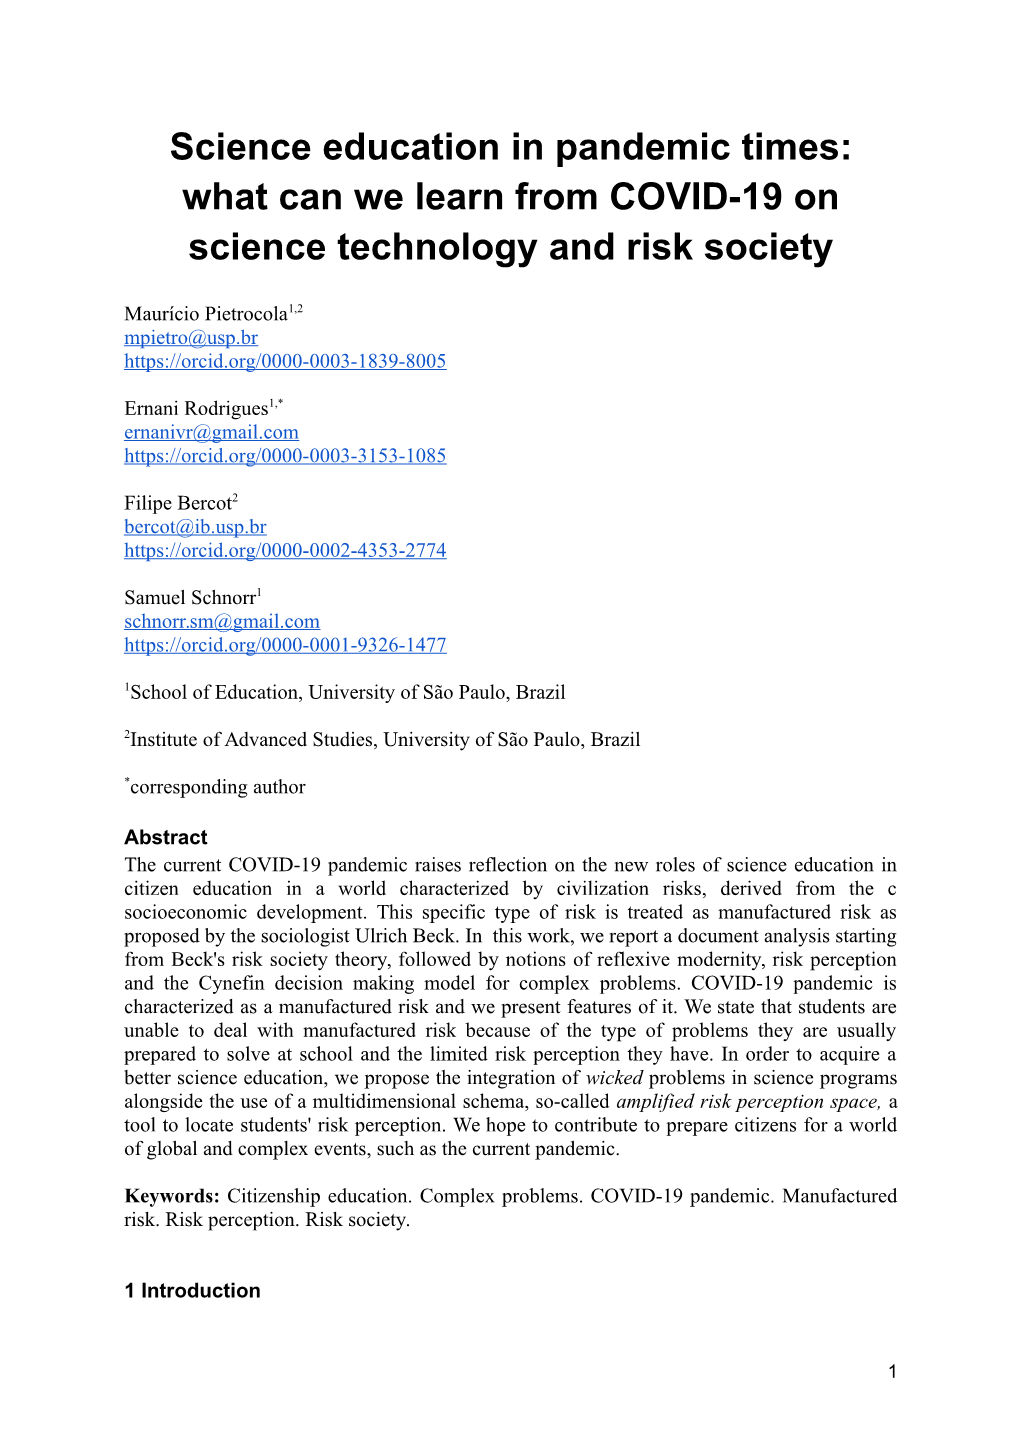 What Can We Learn from COVID-19 on Science Technology and Risk Society